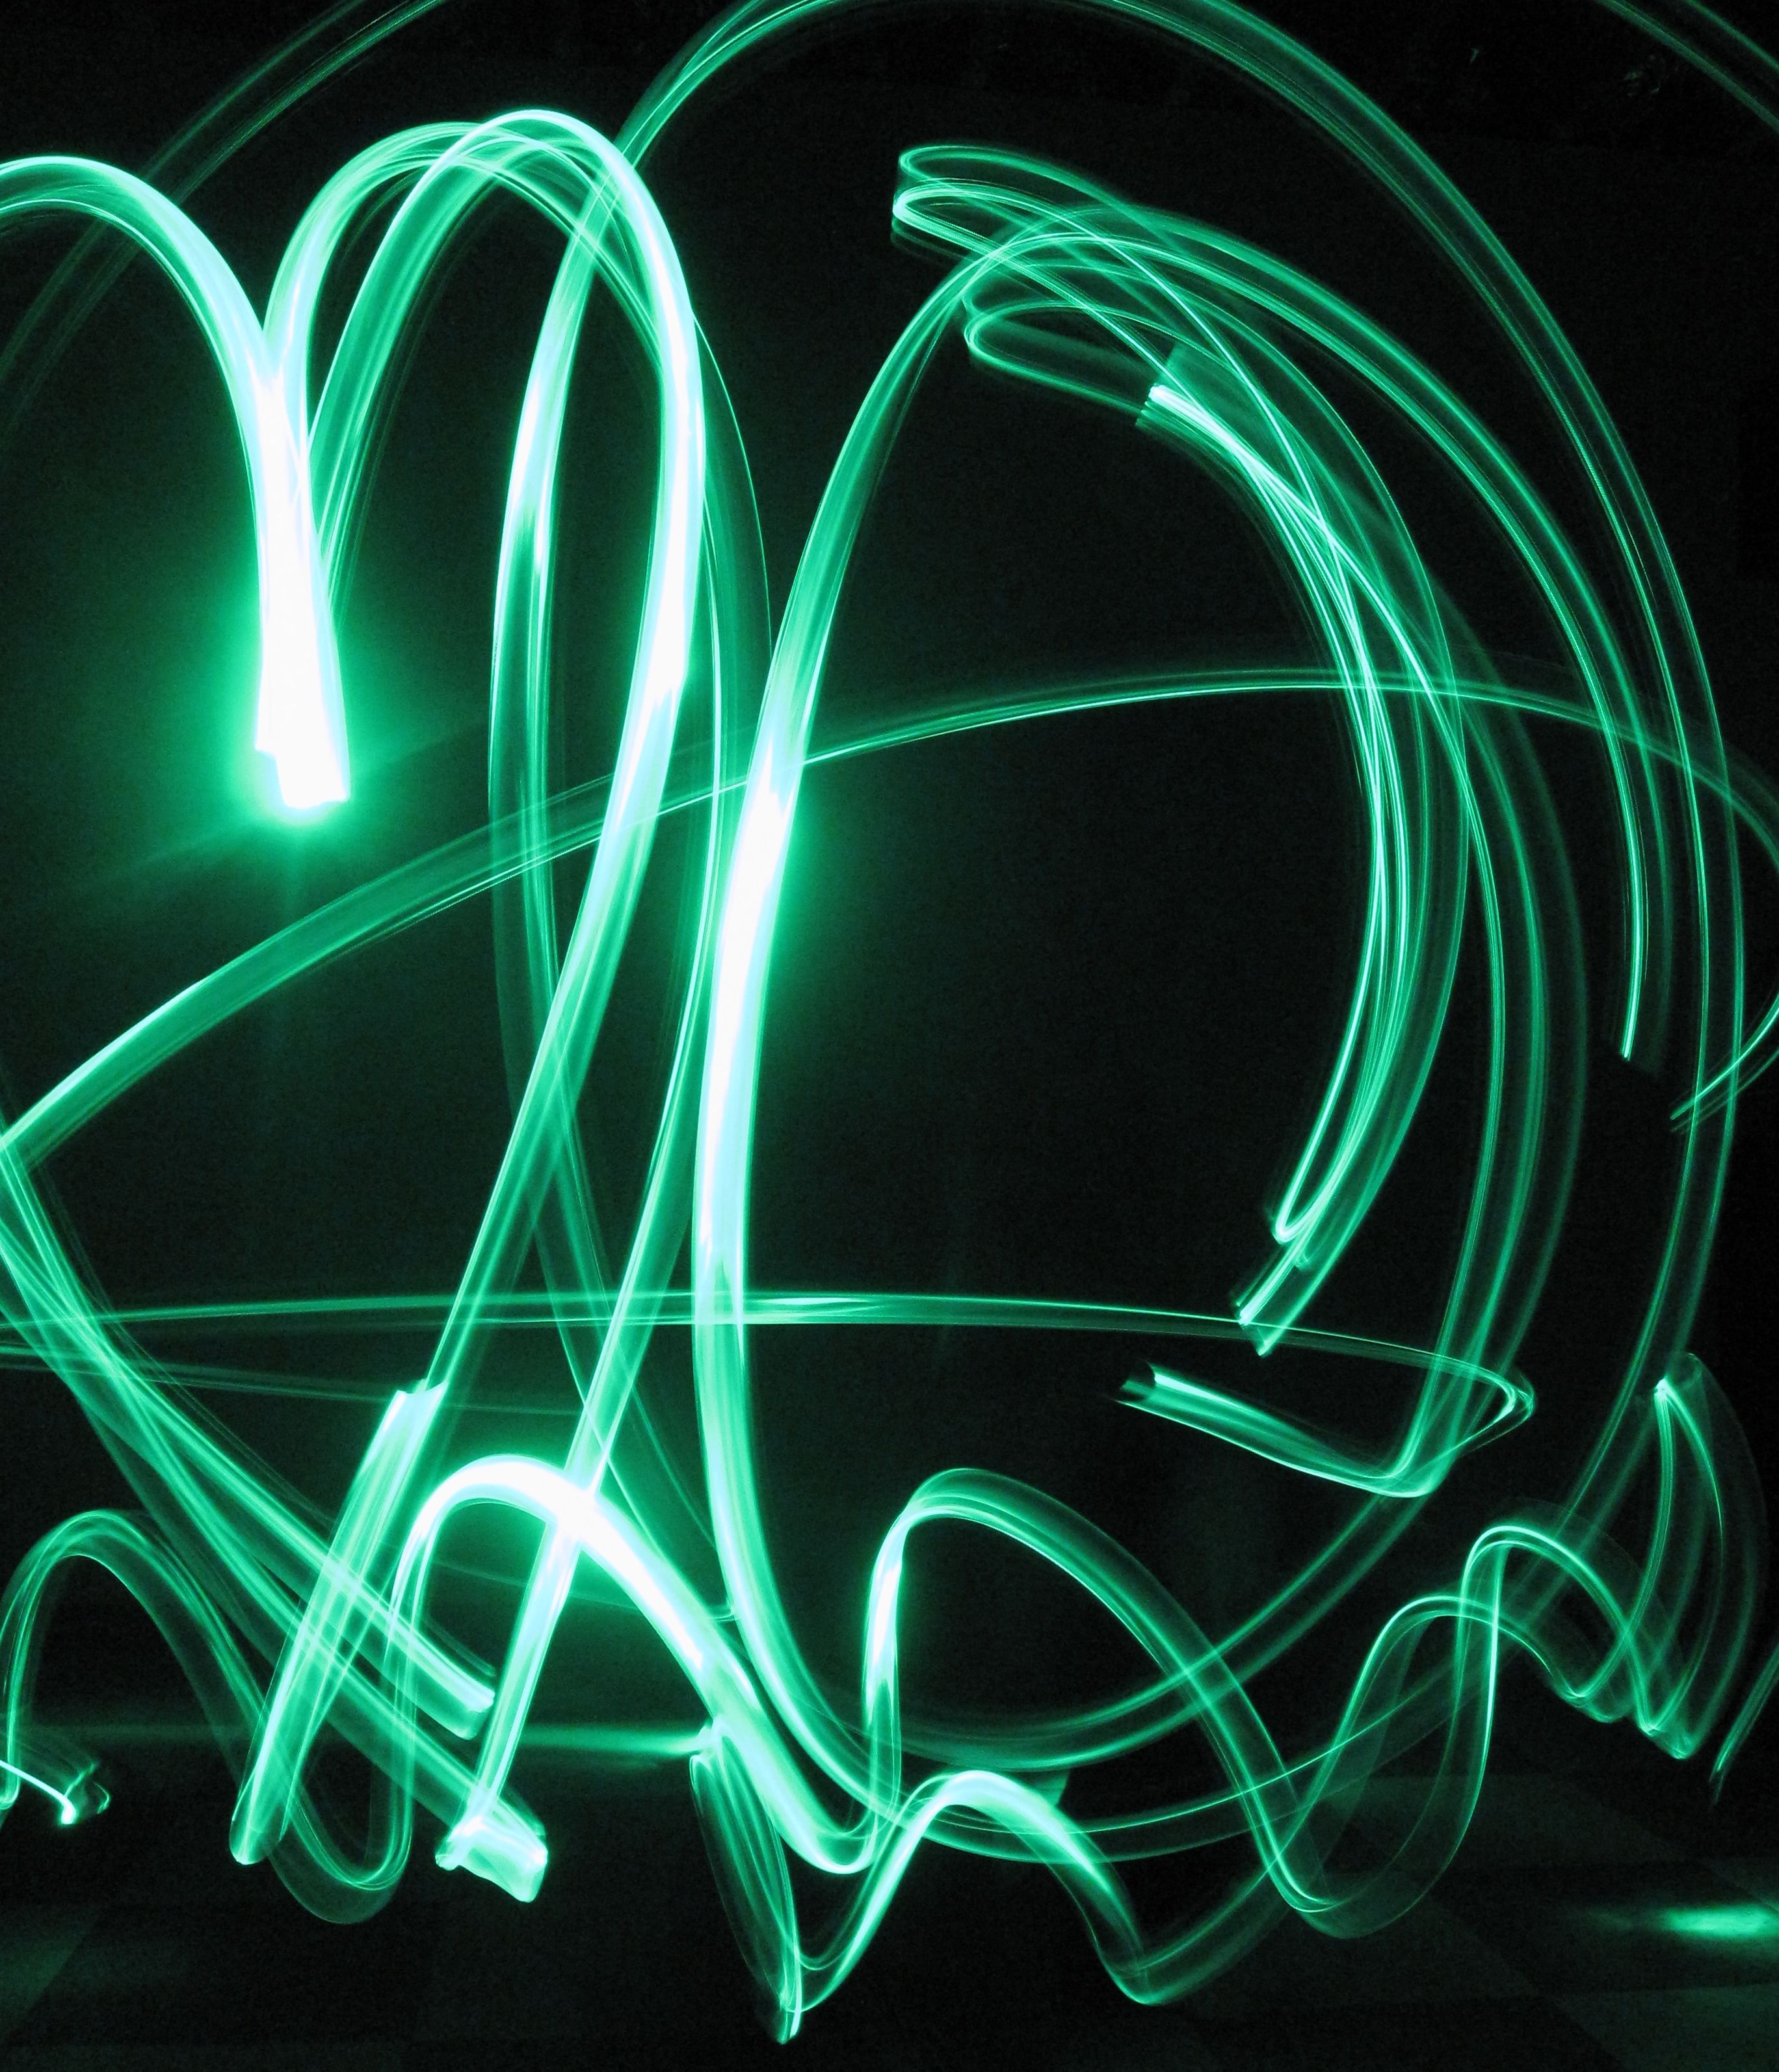 A green heart made with light painting - Graffiti